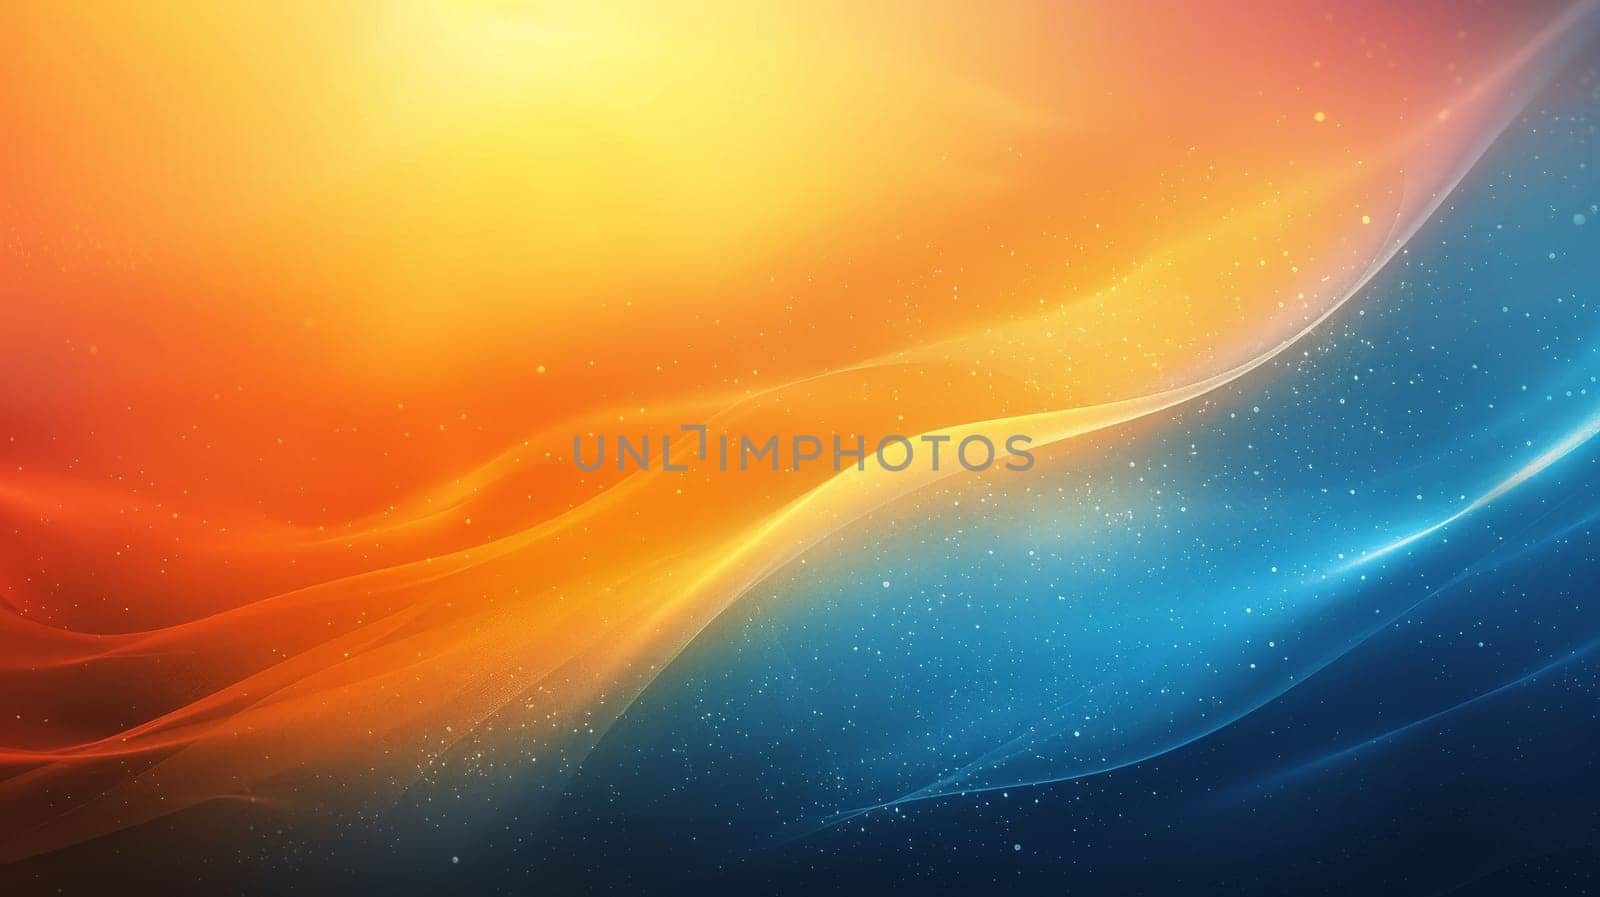 A colorful, abstract image with a blue, red, and yellow gradient. The colors are vibrant and the image has a sense of movement and energy